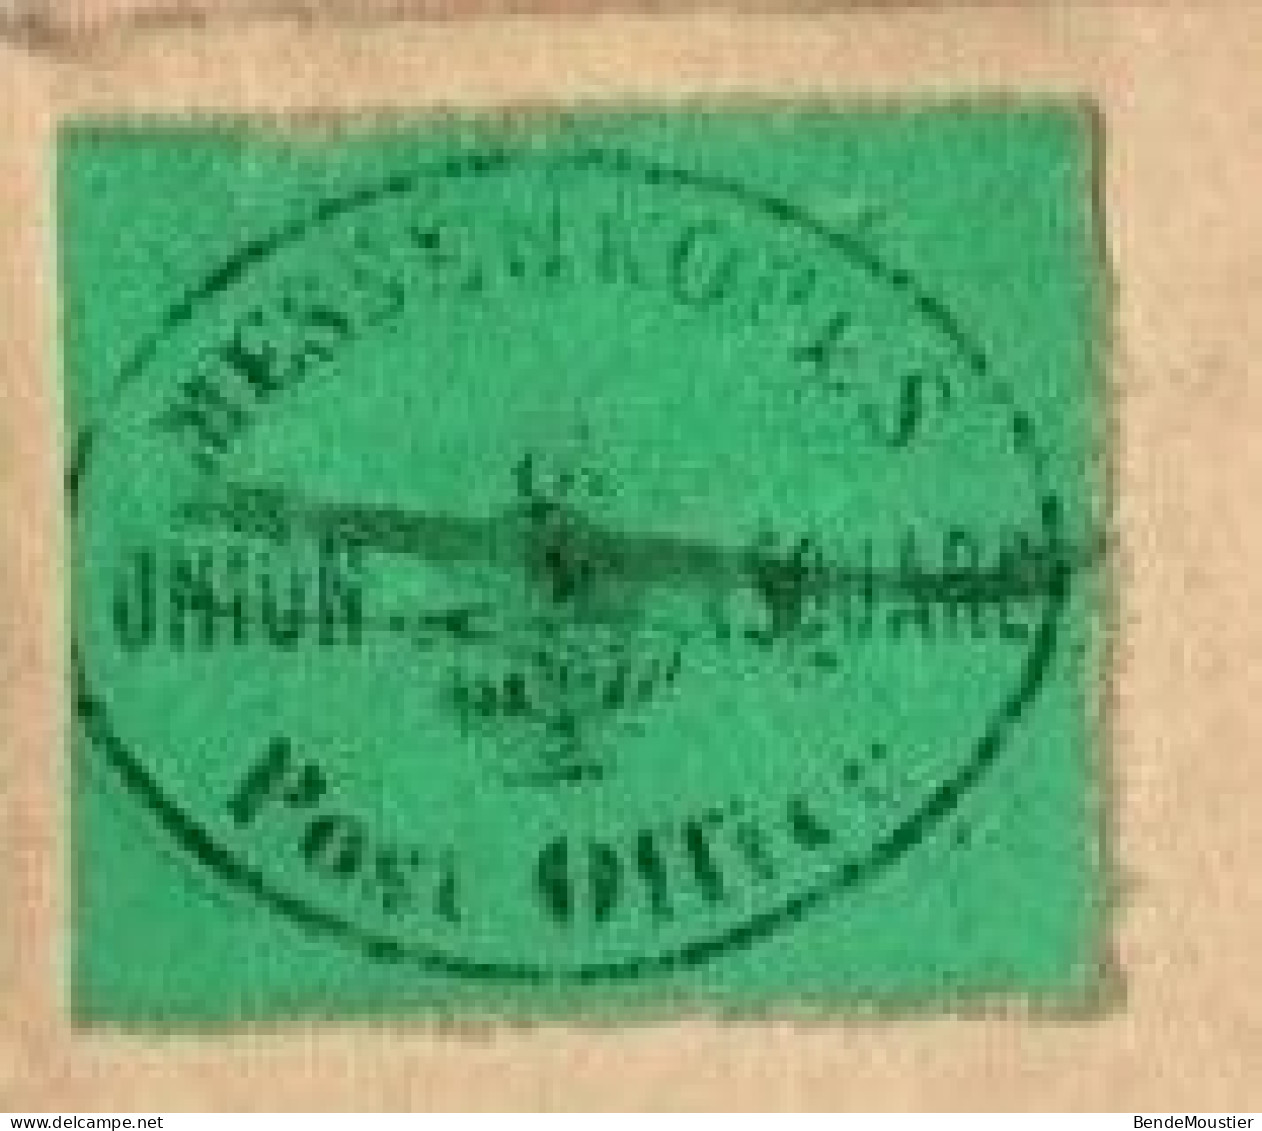 (R122) SCOTT # 106 L1  (L217) - Black On Green - Red Handstamp - Messenkope's Union Square Post Office - 1849. - Locals & Carriers